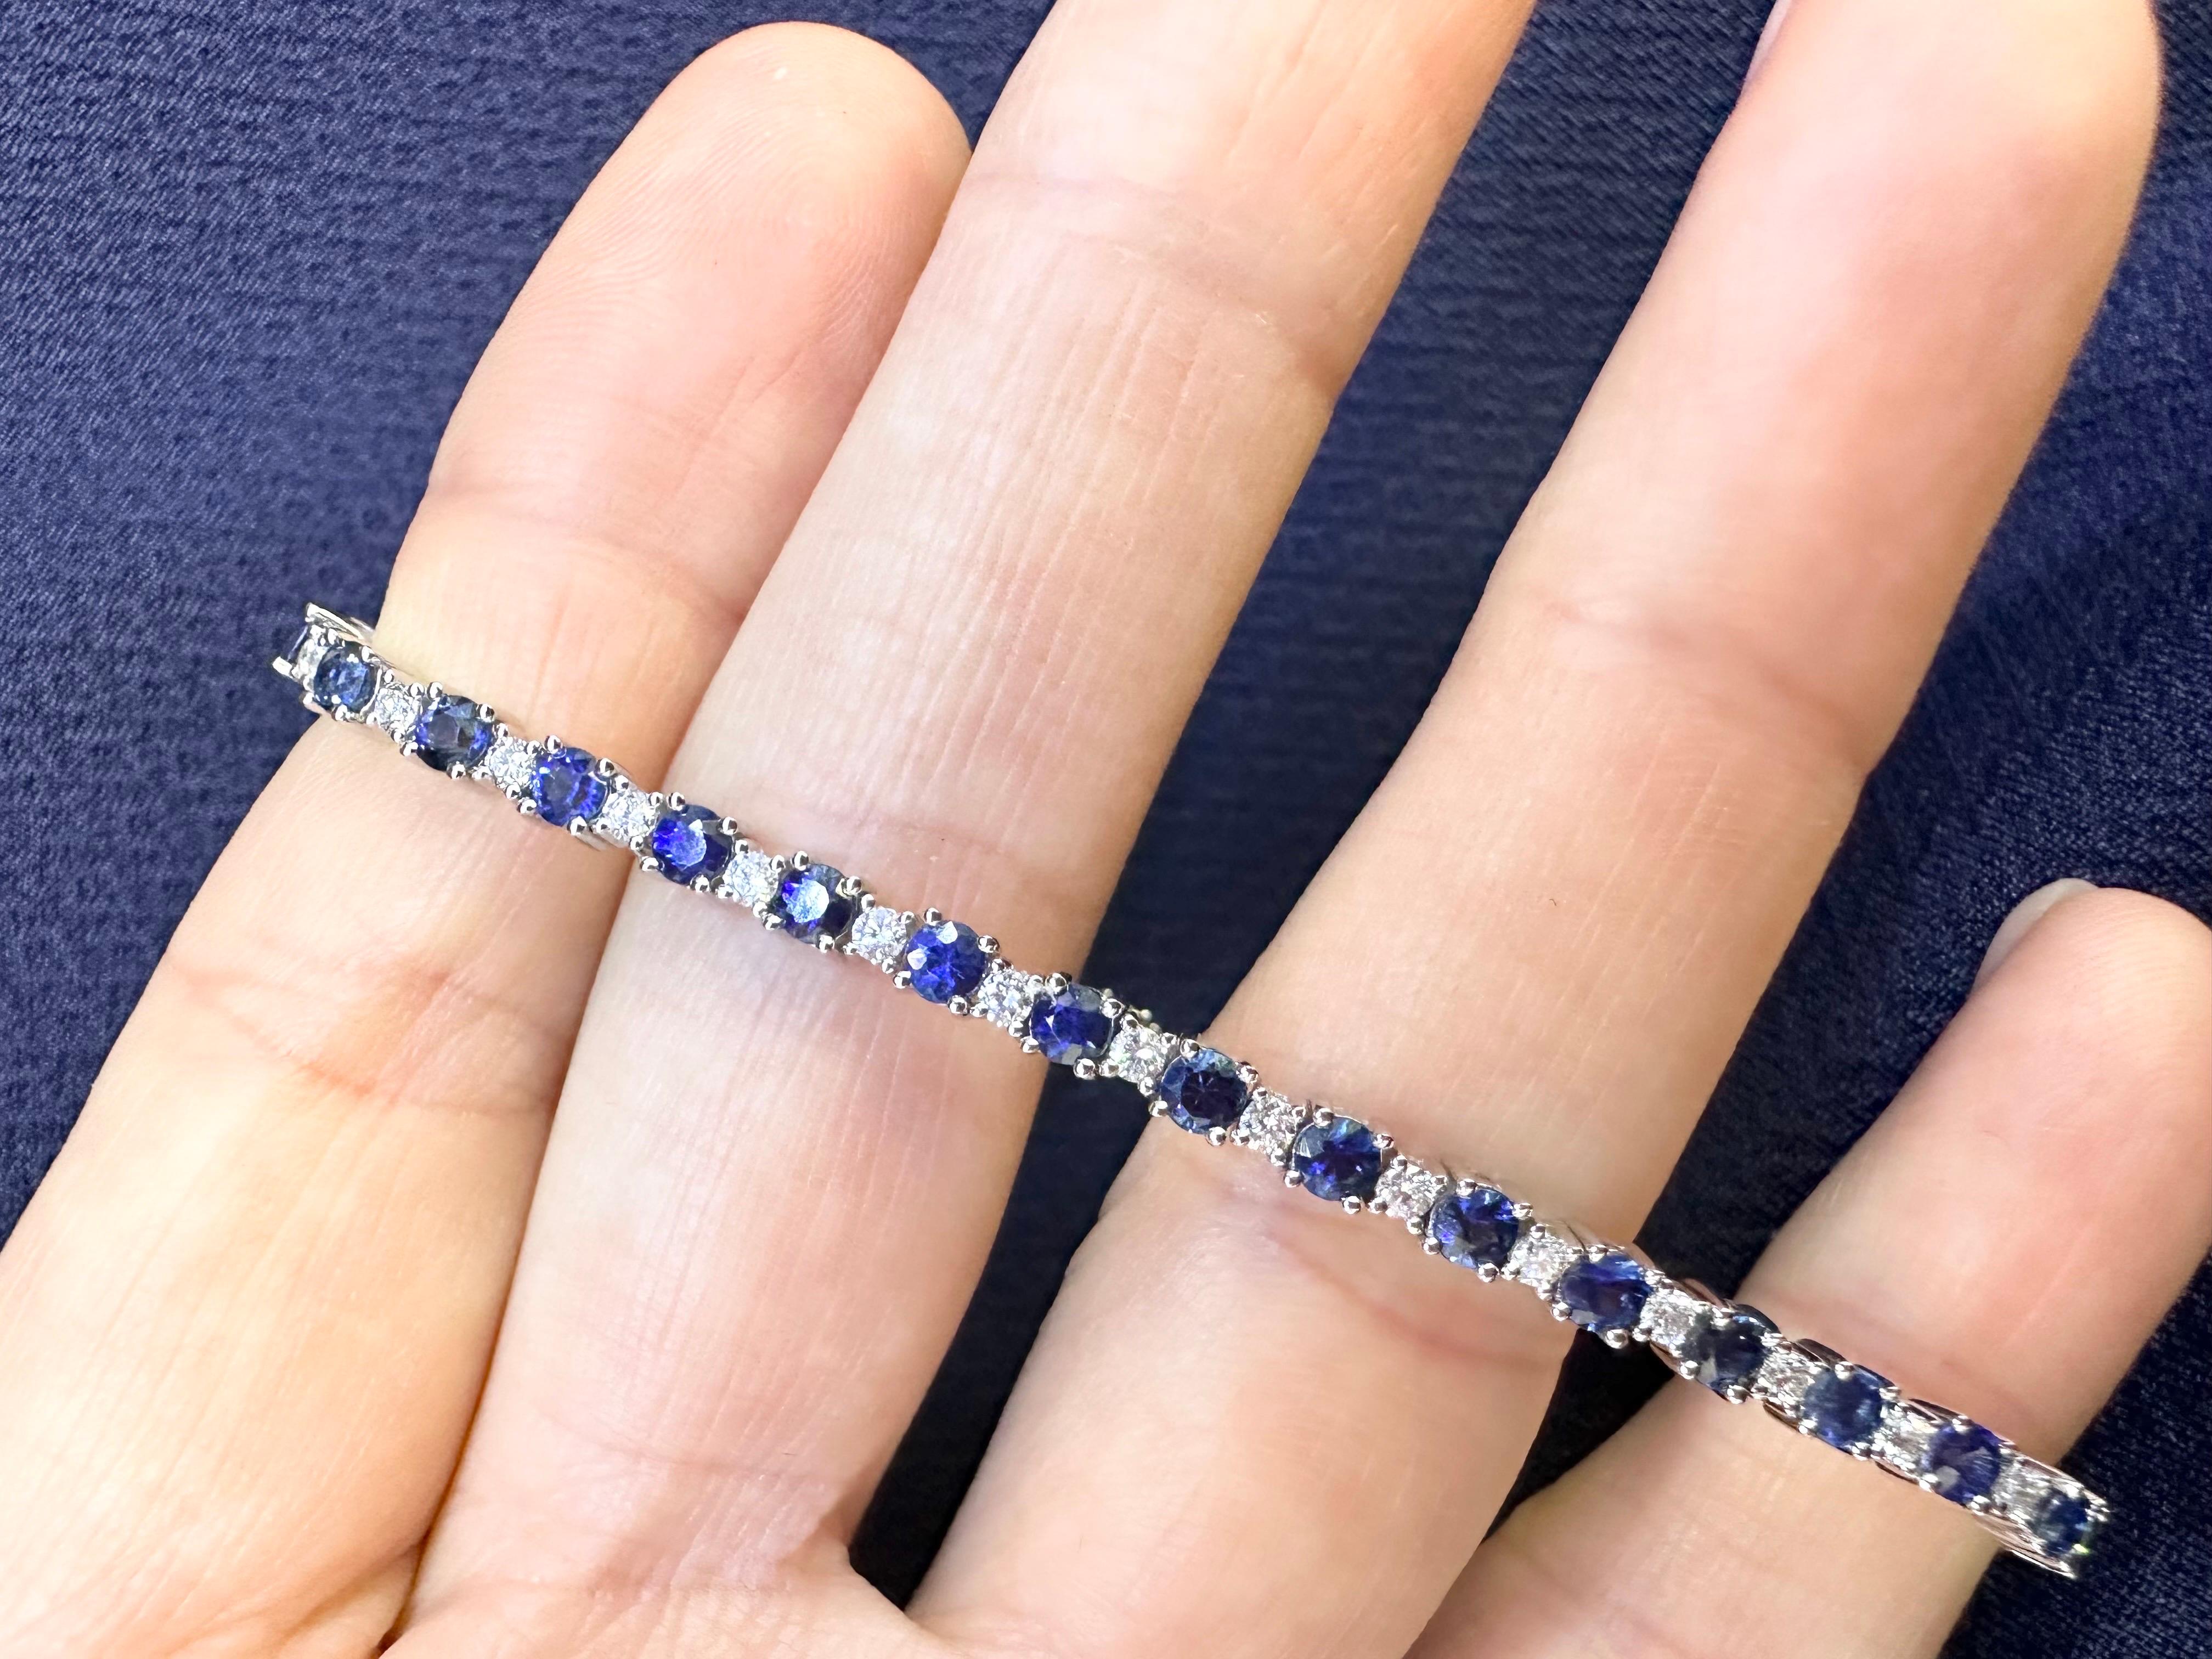 Simple and classy tennis bracelet made with fine sapphires and diamonds in 18KT white gold.

Metal Type: 18KT
Gram Weight:9.75 grams 
Size: 7 